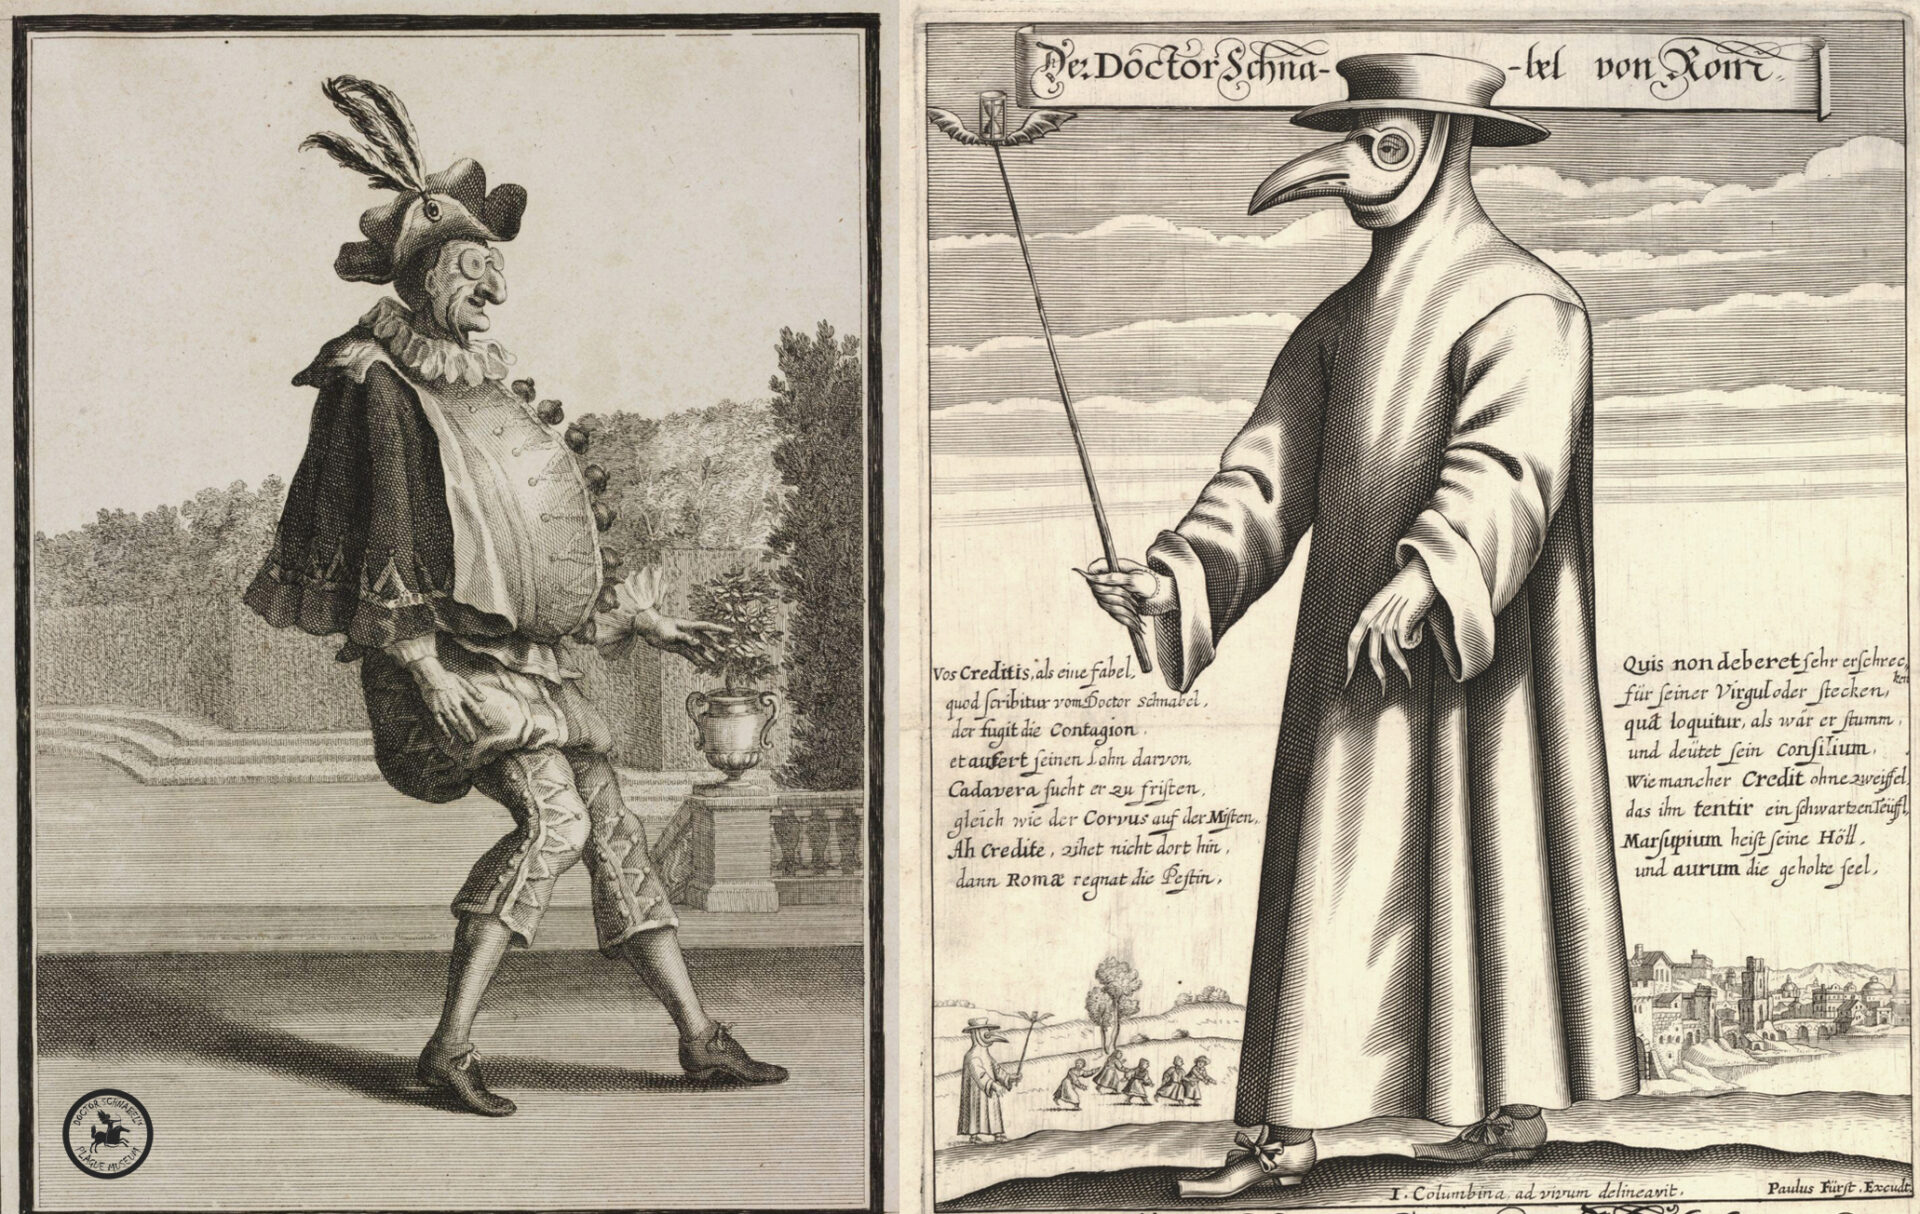 Pulchinella and Plague Doctor Schnabel